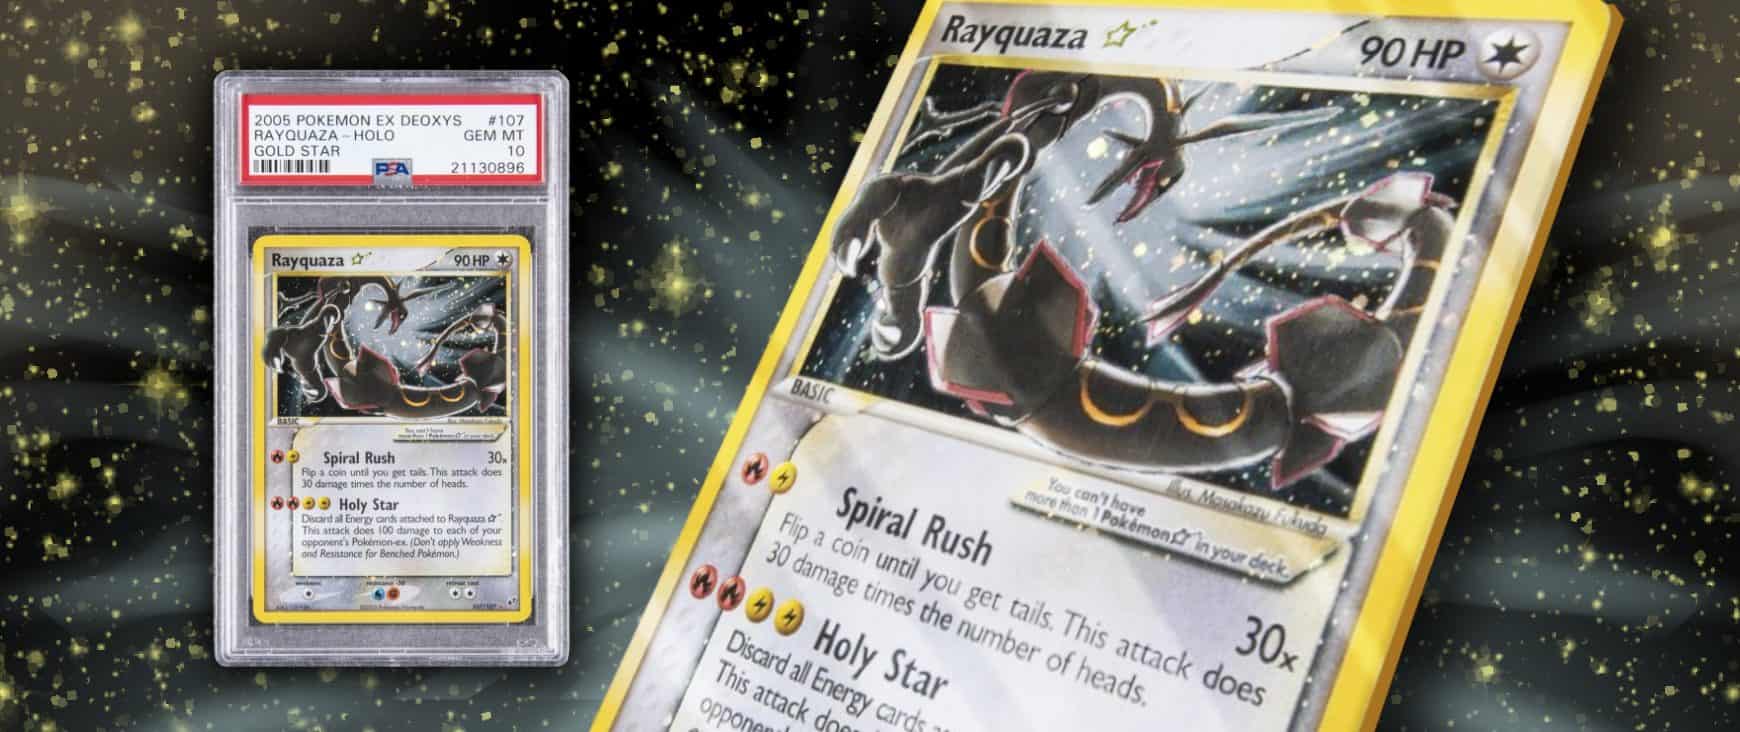 EX Deoxys Gold Star Rayquaza Holographic